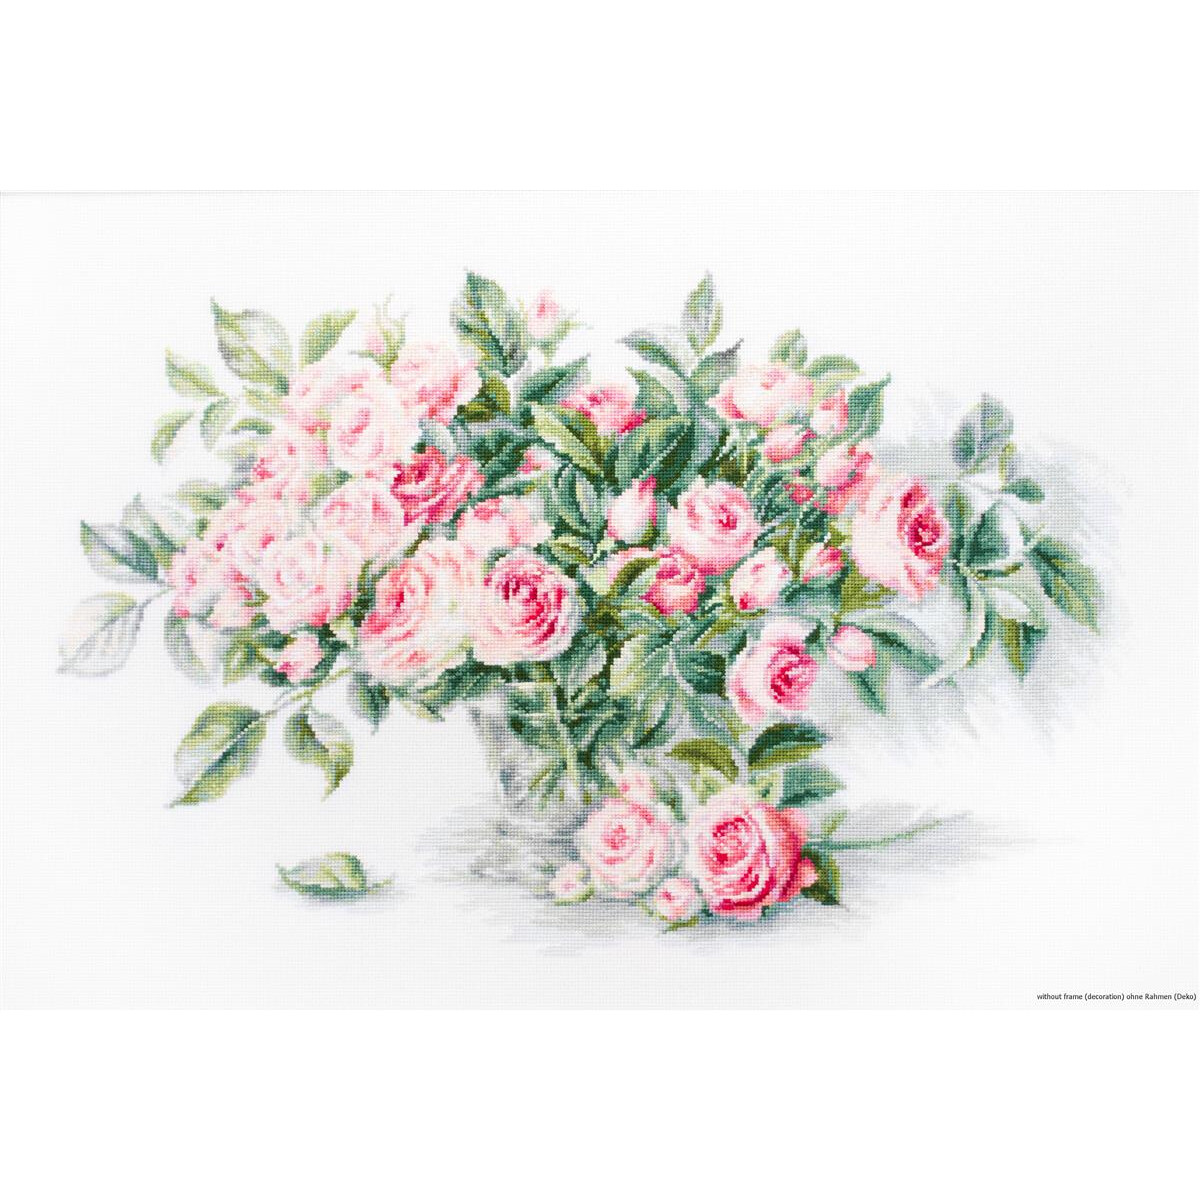 Luca-S counted Cross Stitch kit "Bouquet of Pink...